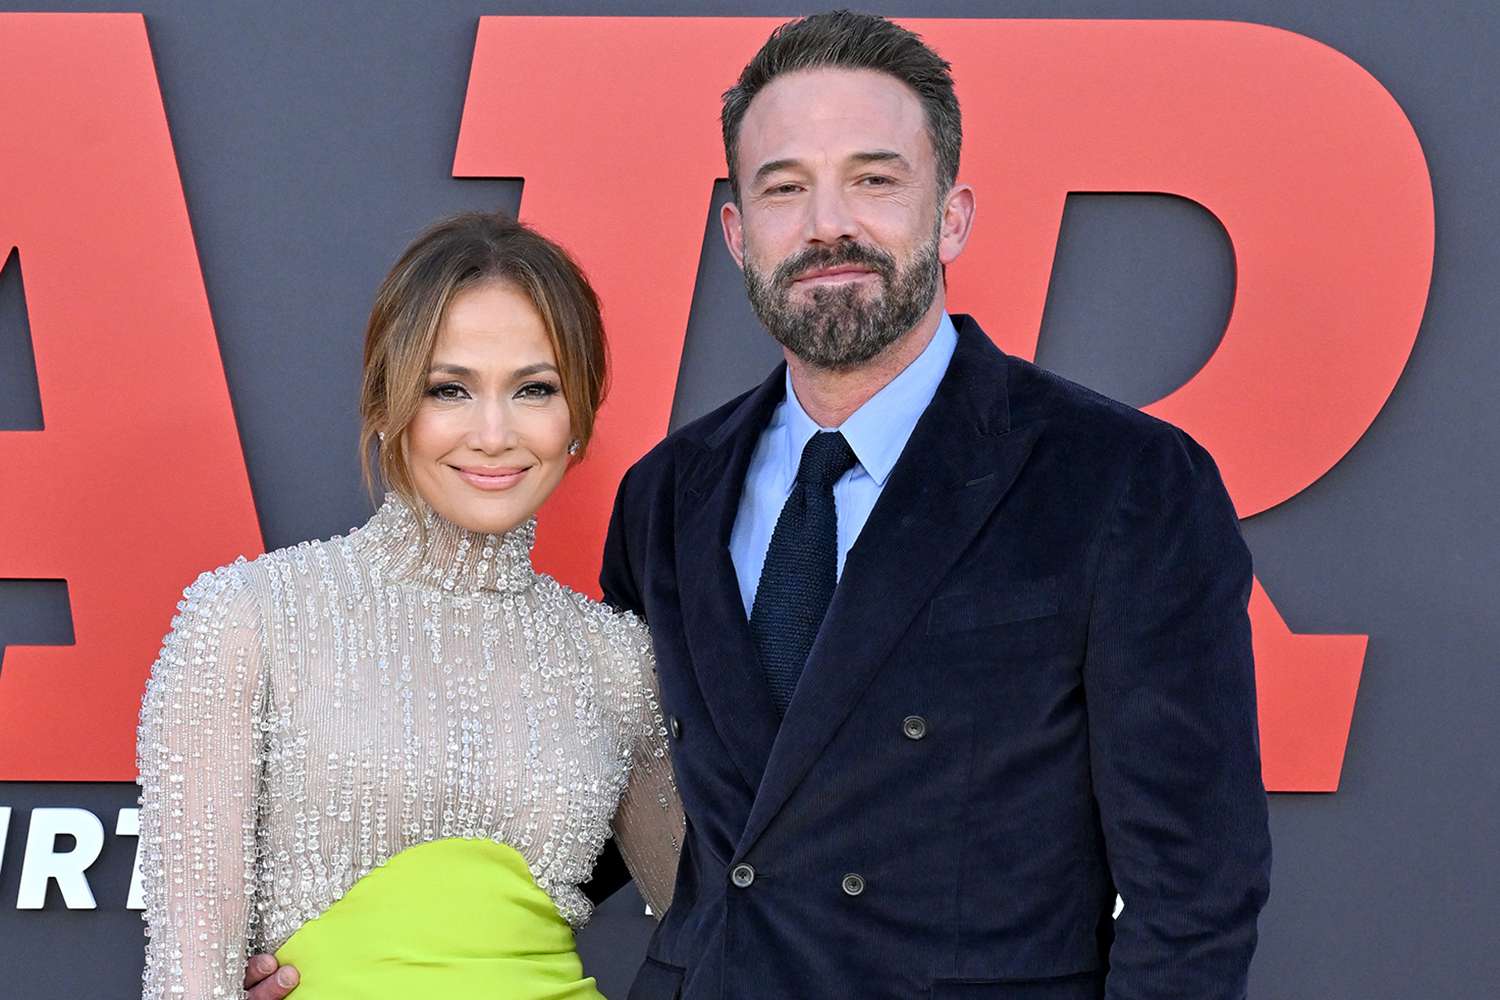 Jennifer Lopez and Ben Affleck attend the Amazon Studios' World Premiere of "AIR"